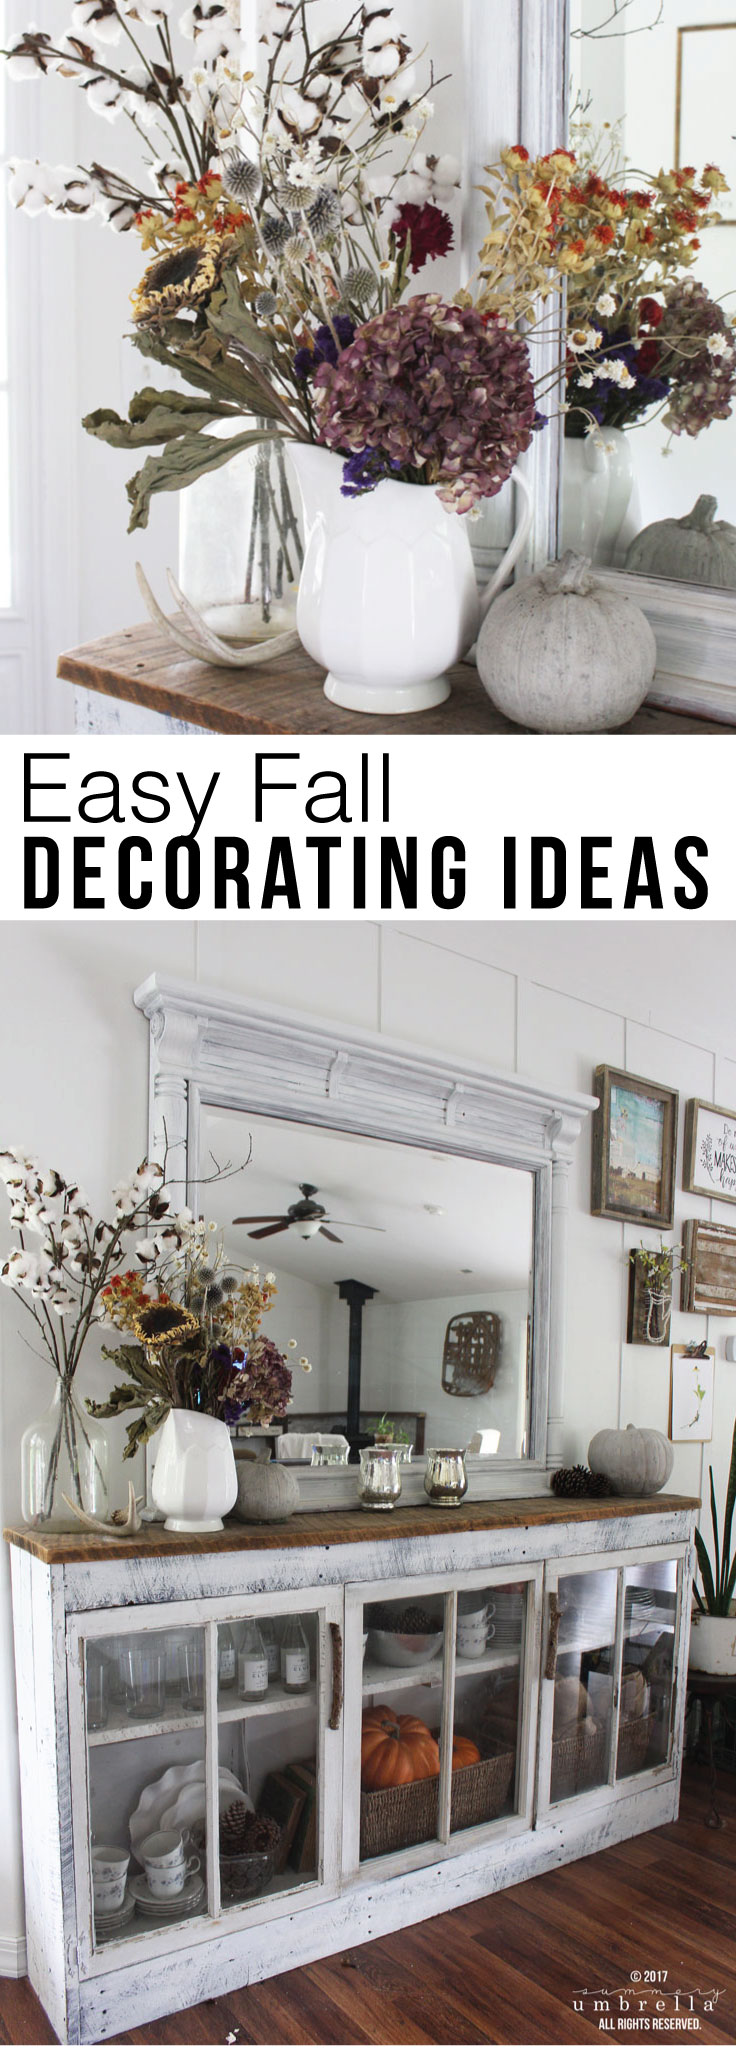 Have you been looking for Super Easy Fall Decorating Ideas that can be used on a variety of spaces? Look no further because this is the post for you!